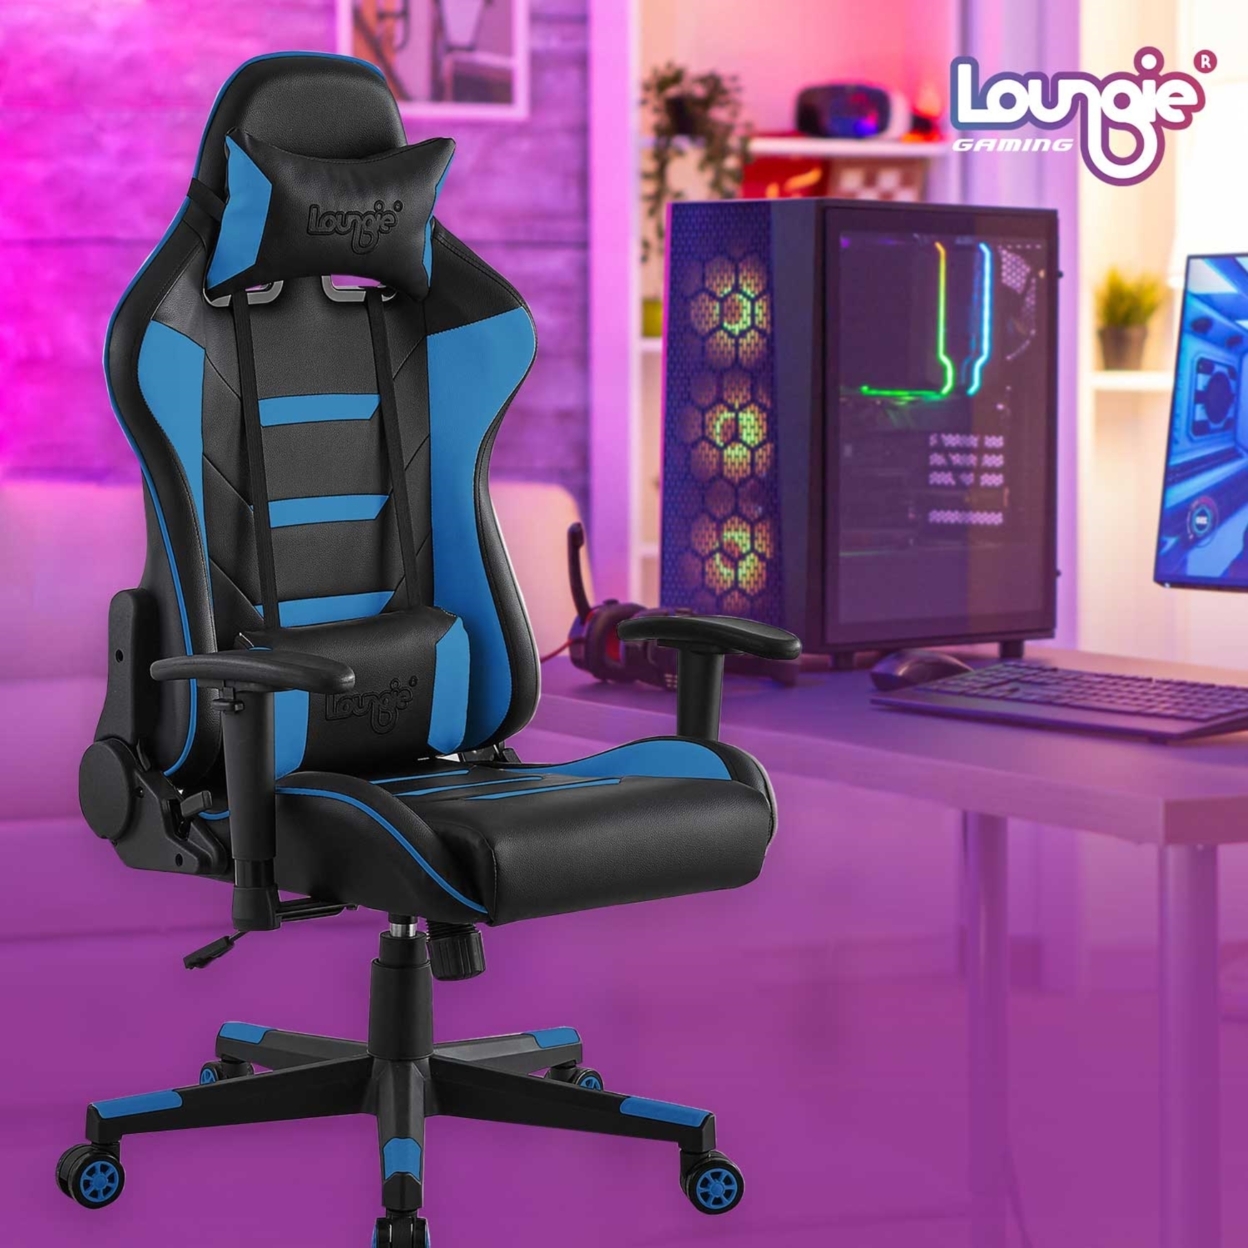 Brad Game Chair-Swivel, Adjustable Back Angle, Seat Height and Armrest-360 Degree Rotation-Neck Support, Lumbar Support Cushion - navy - navy blue